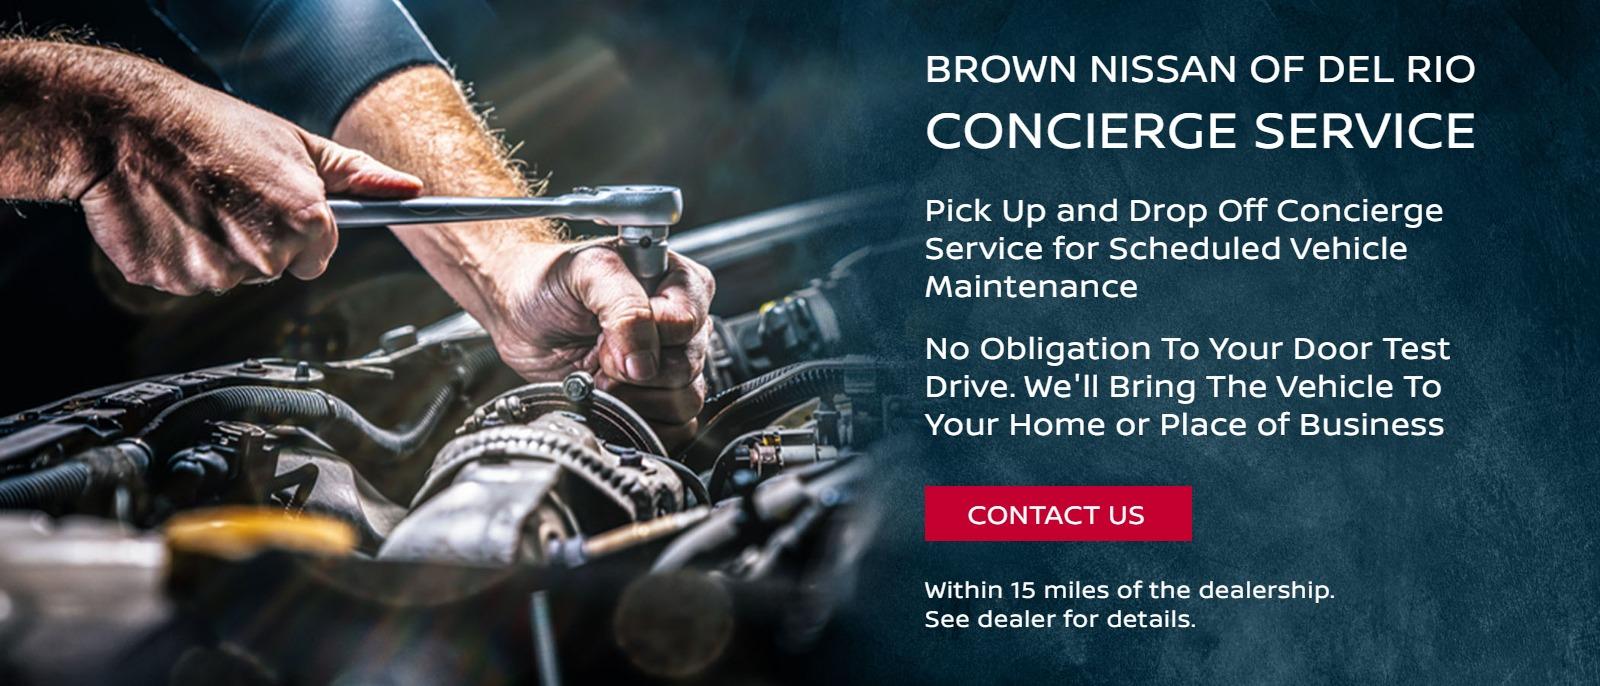 Pick Up and Drop Off Concierge Service for Scheduled Vehicle Maintenance

No Obligation To Your Door Test Drive. We'll Bring The Vehicle To Your Home or Place of Business

Withing 15 miles of the dealership. See dealer for details.